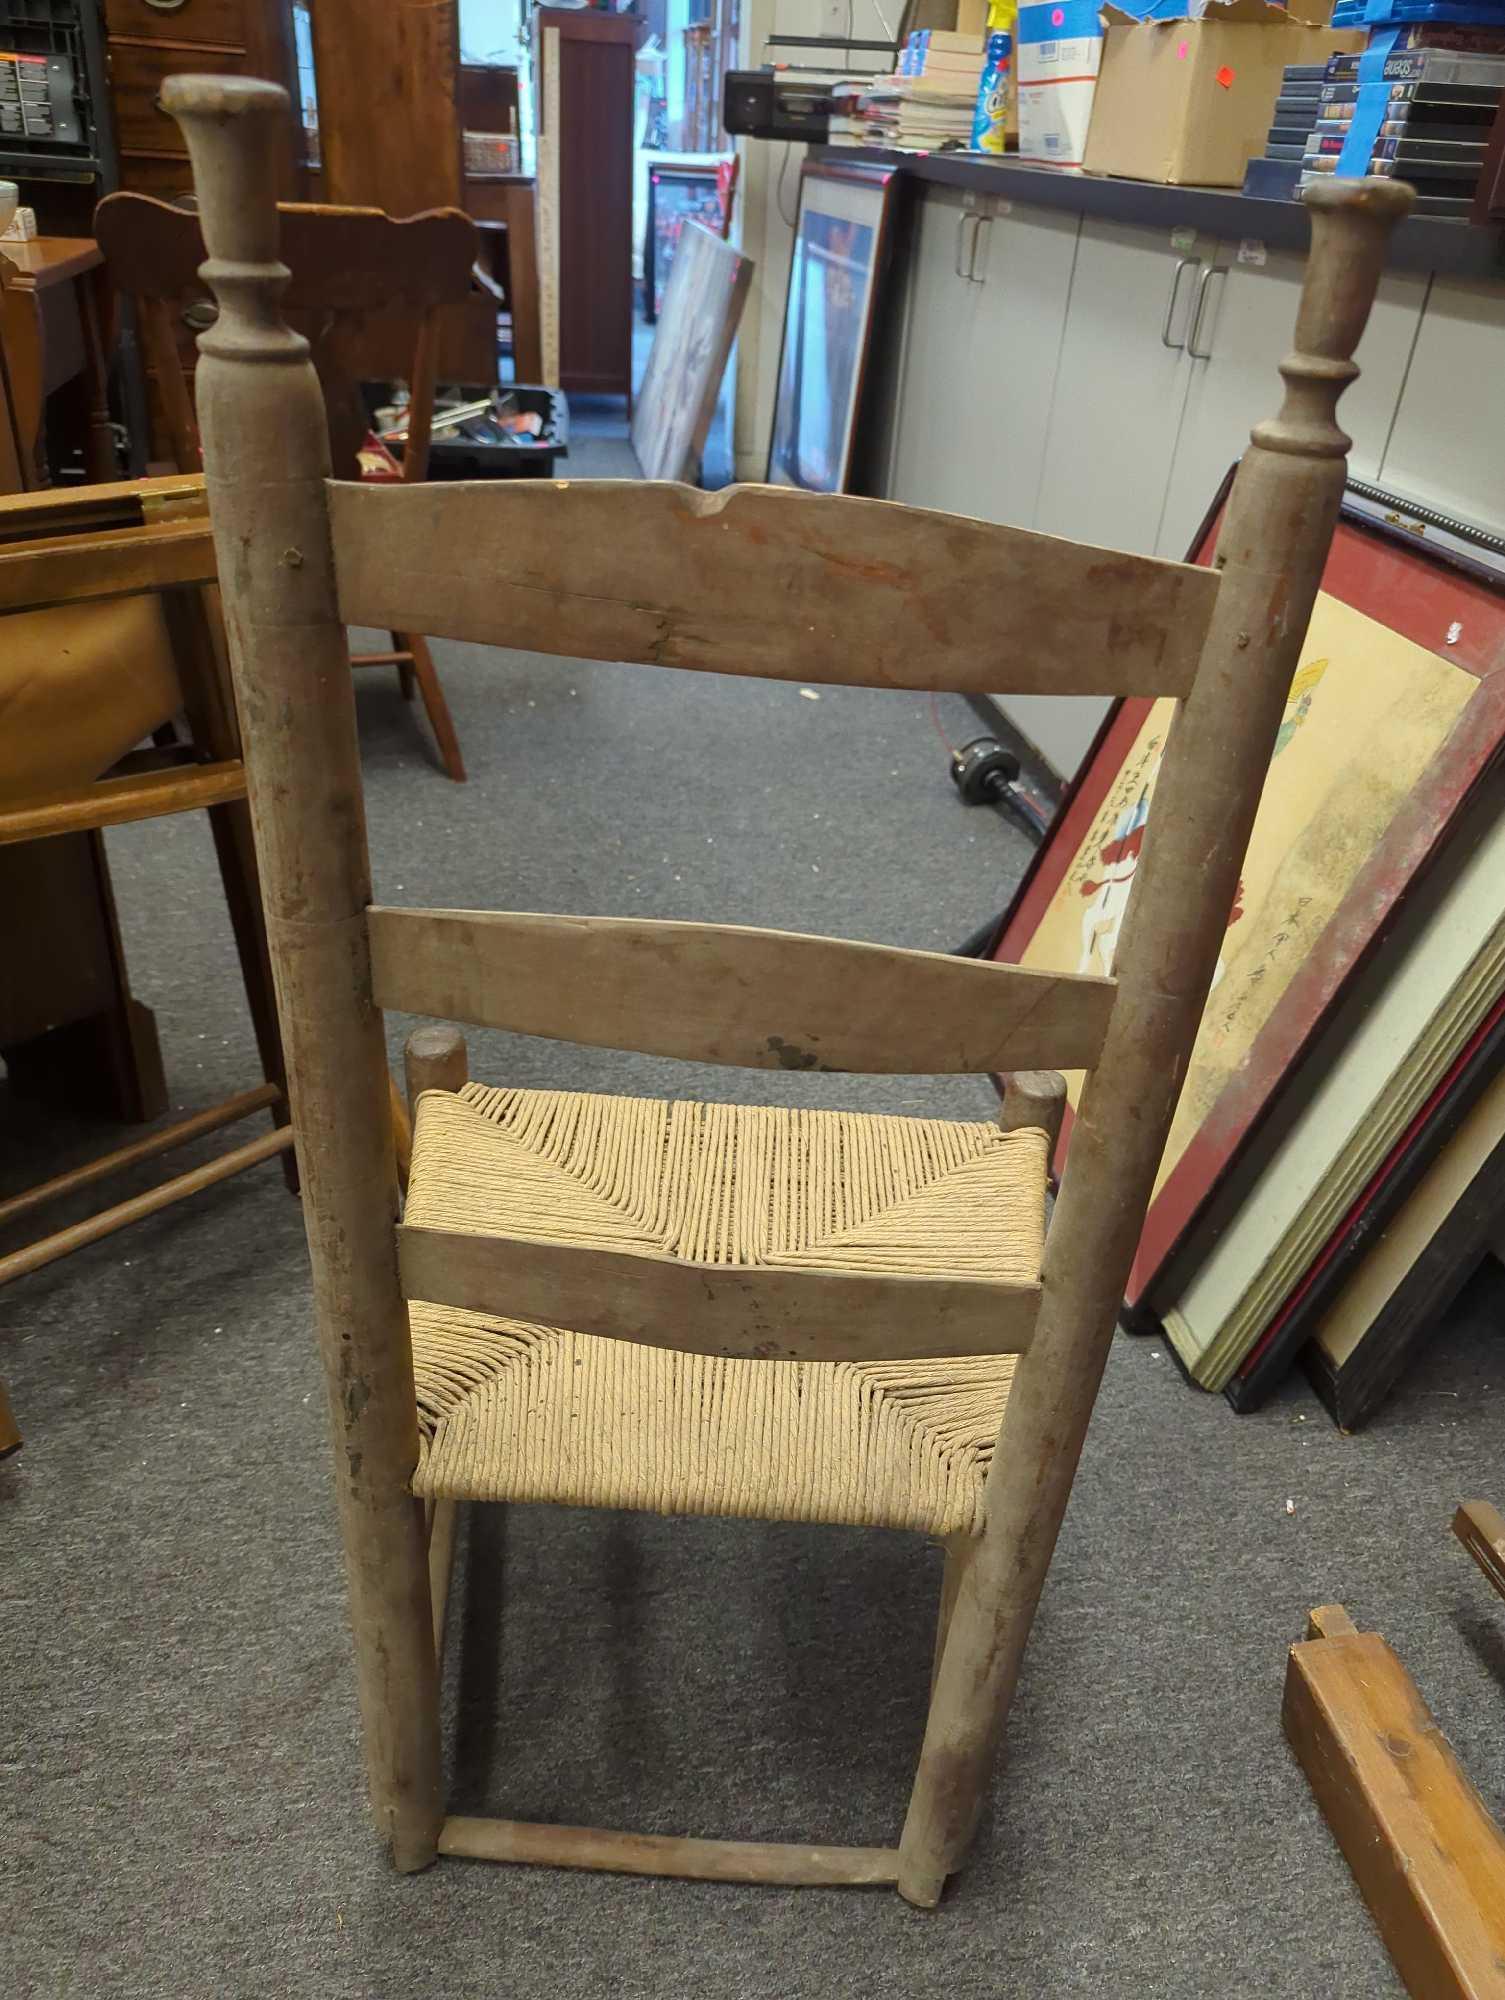 Replica of a Colonial Chair Primitive ANTIQUE 18th Century Wooden Ladder Back Chair 1750s, Item